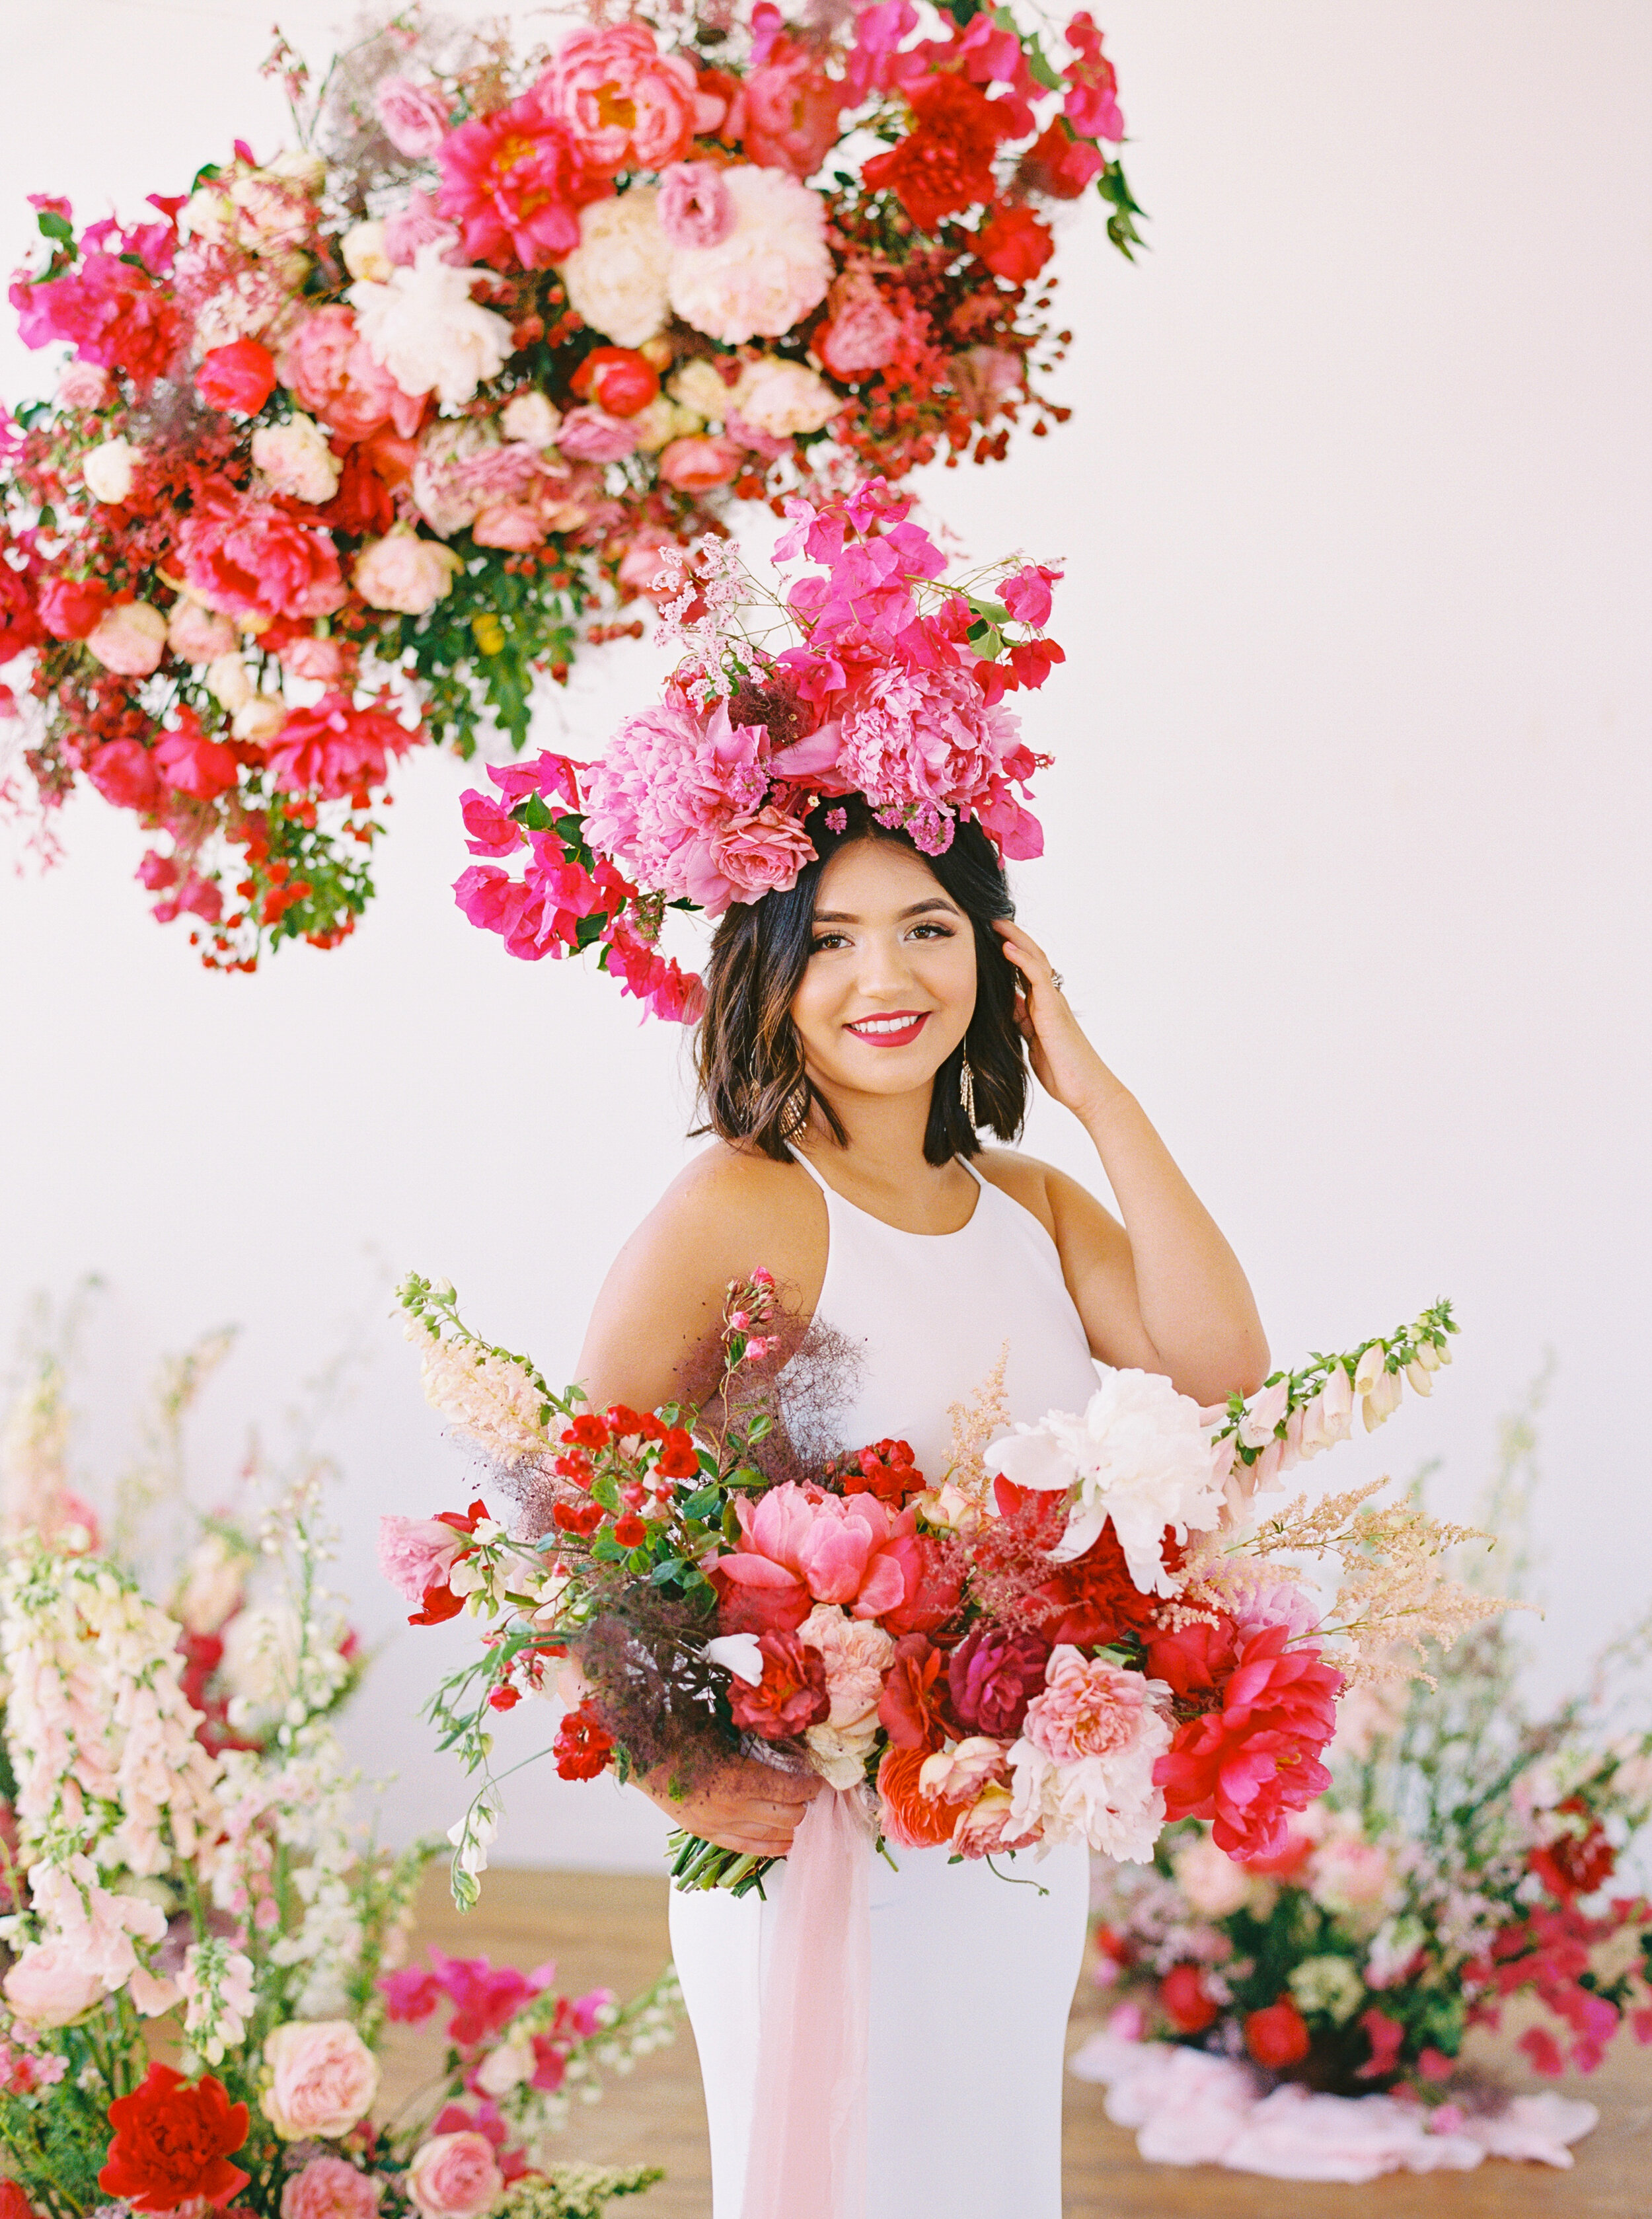 A Romantic Wedding Elopement Filled with Colorful Fuchsia - Sarahi Hadden Submission-45.jpg